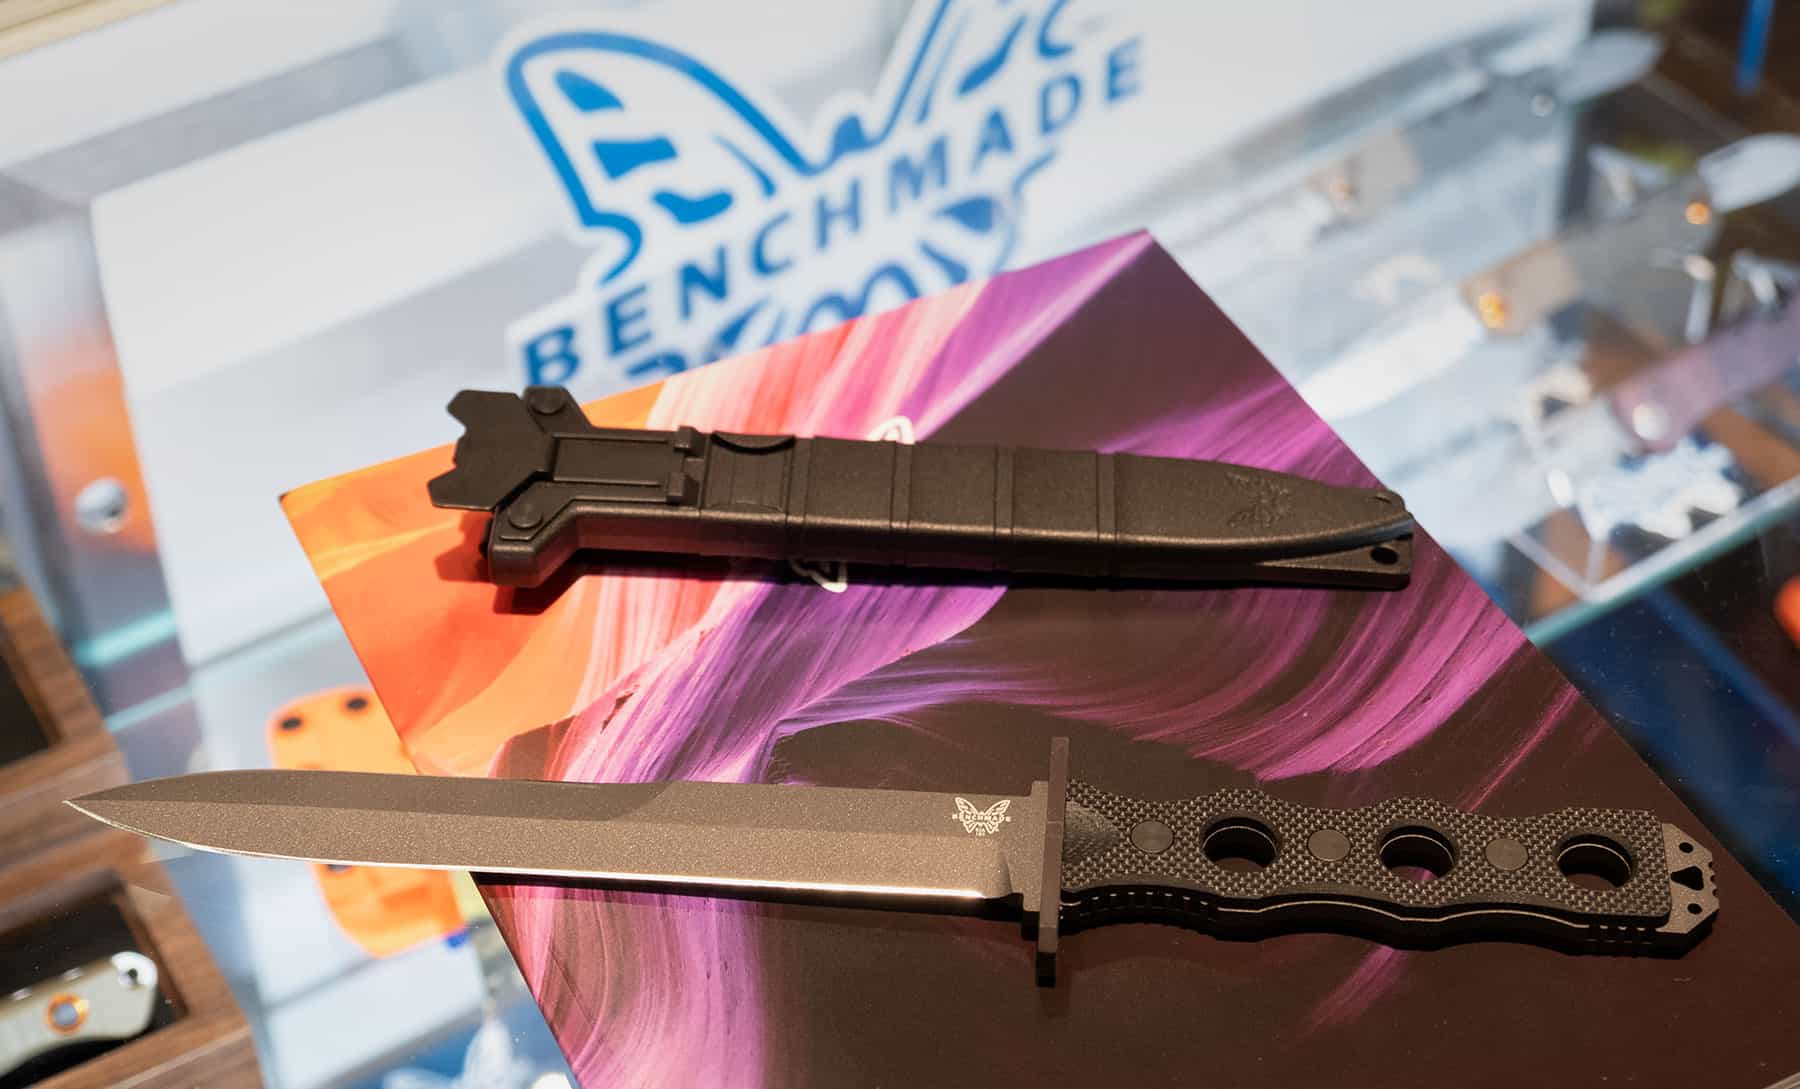 The SOCP fixed blade from Benchmade is a tactical dagger that is compatible with the M4. 